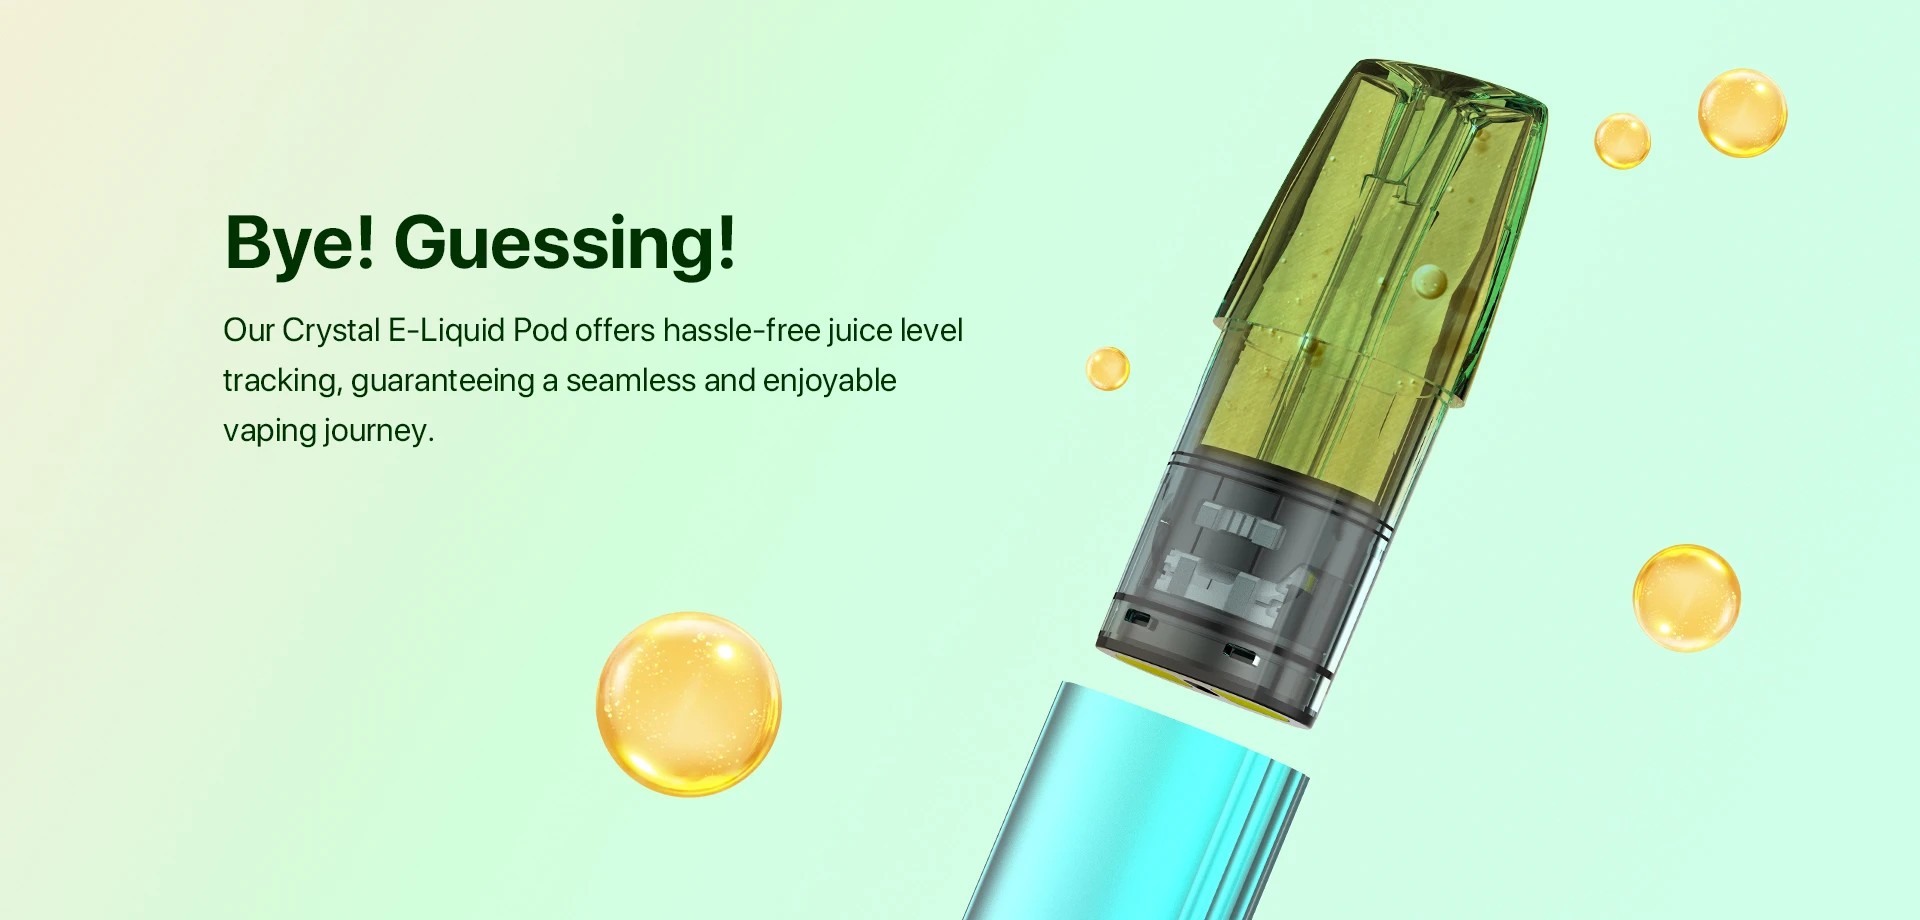 Bye! Guessing! Our Crystal E-Liquid Pod offers hassle-free juice level tracking, guaranteeing a seamless and enjoyable vaping journey